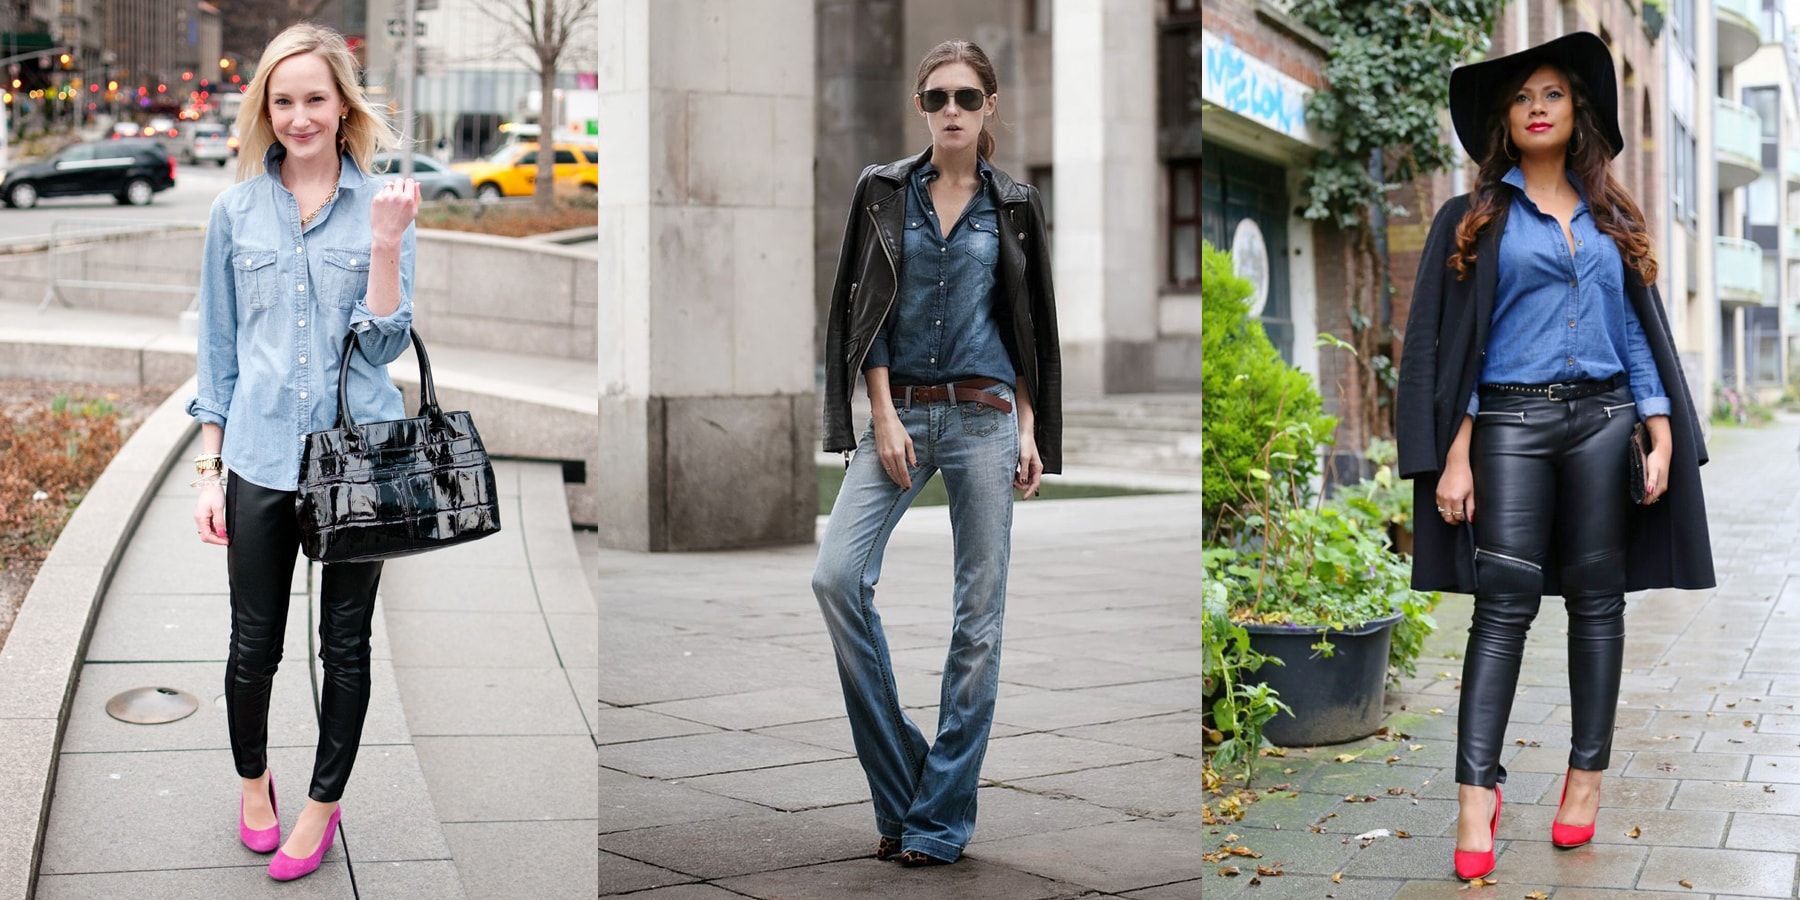 Look Casual but Still Cool with a Denim Shirt!